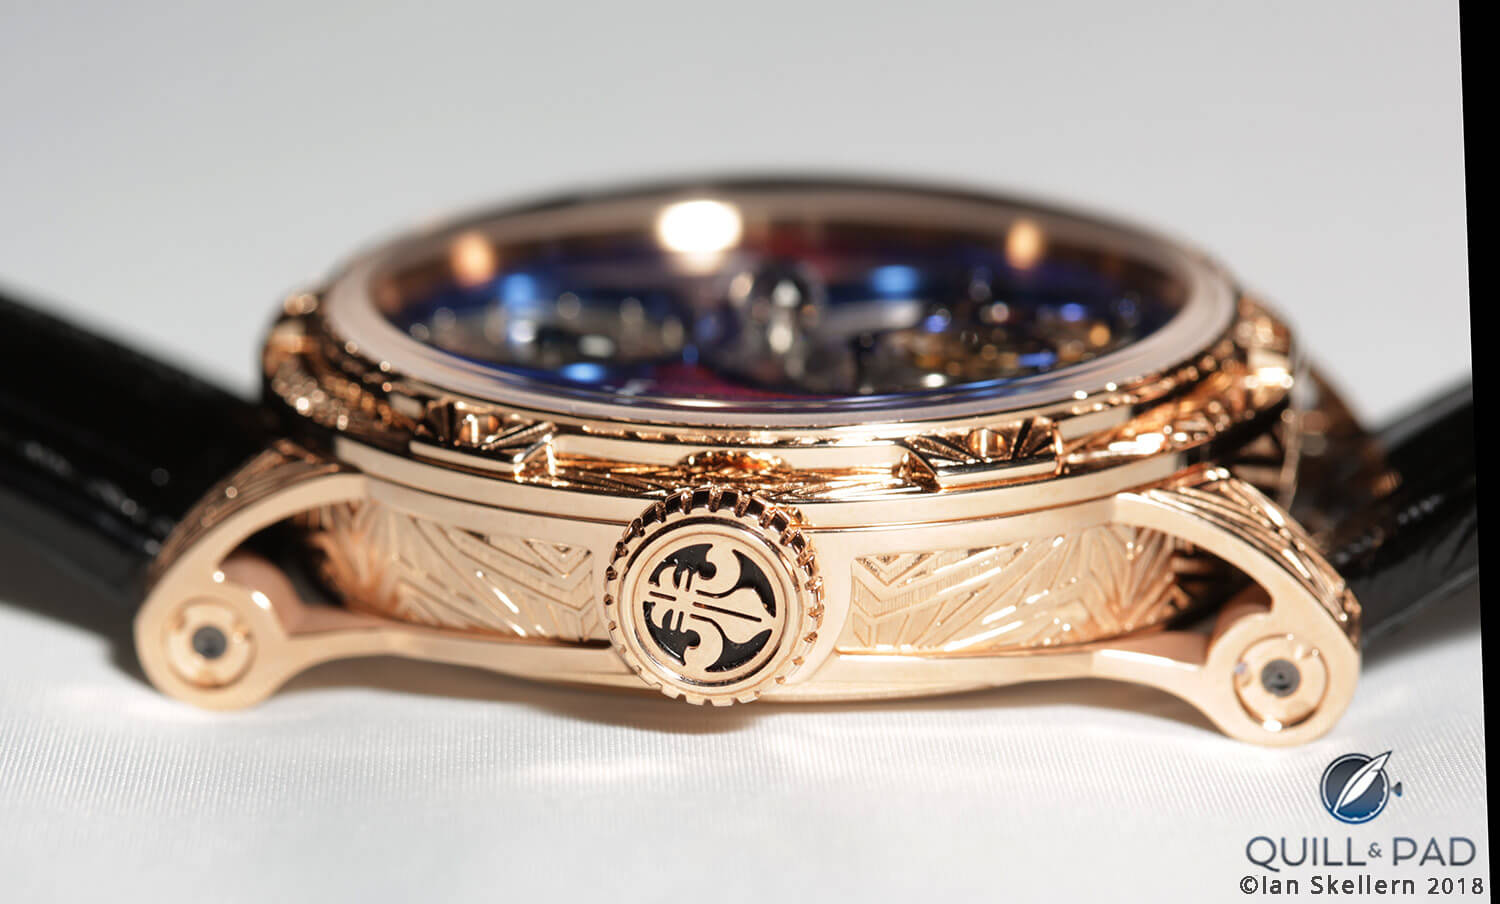 Engraved bezel, caseband and crown of the Louis Moinet Spacewalker